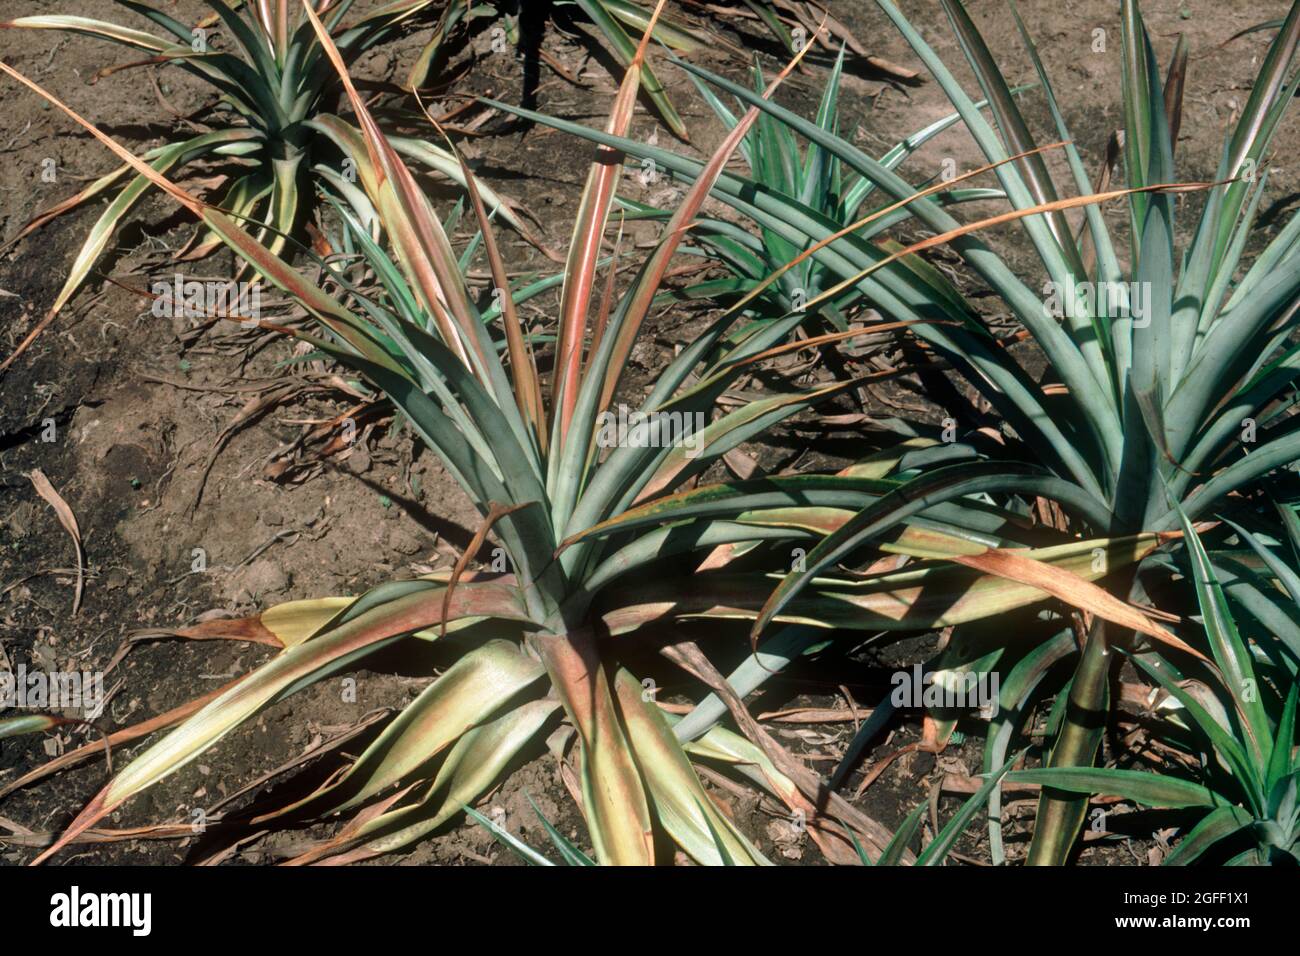 Heart rot (Phytophthora nicotianae var. parasitica) yellowing discolouration symptoms and dying growing point in young pineapple plants, South Africa Stock Photo